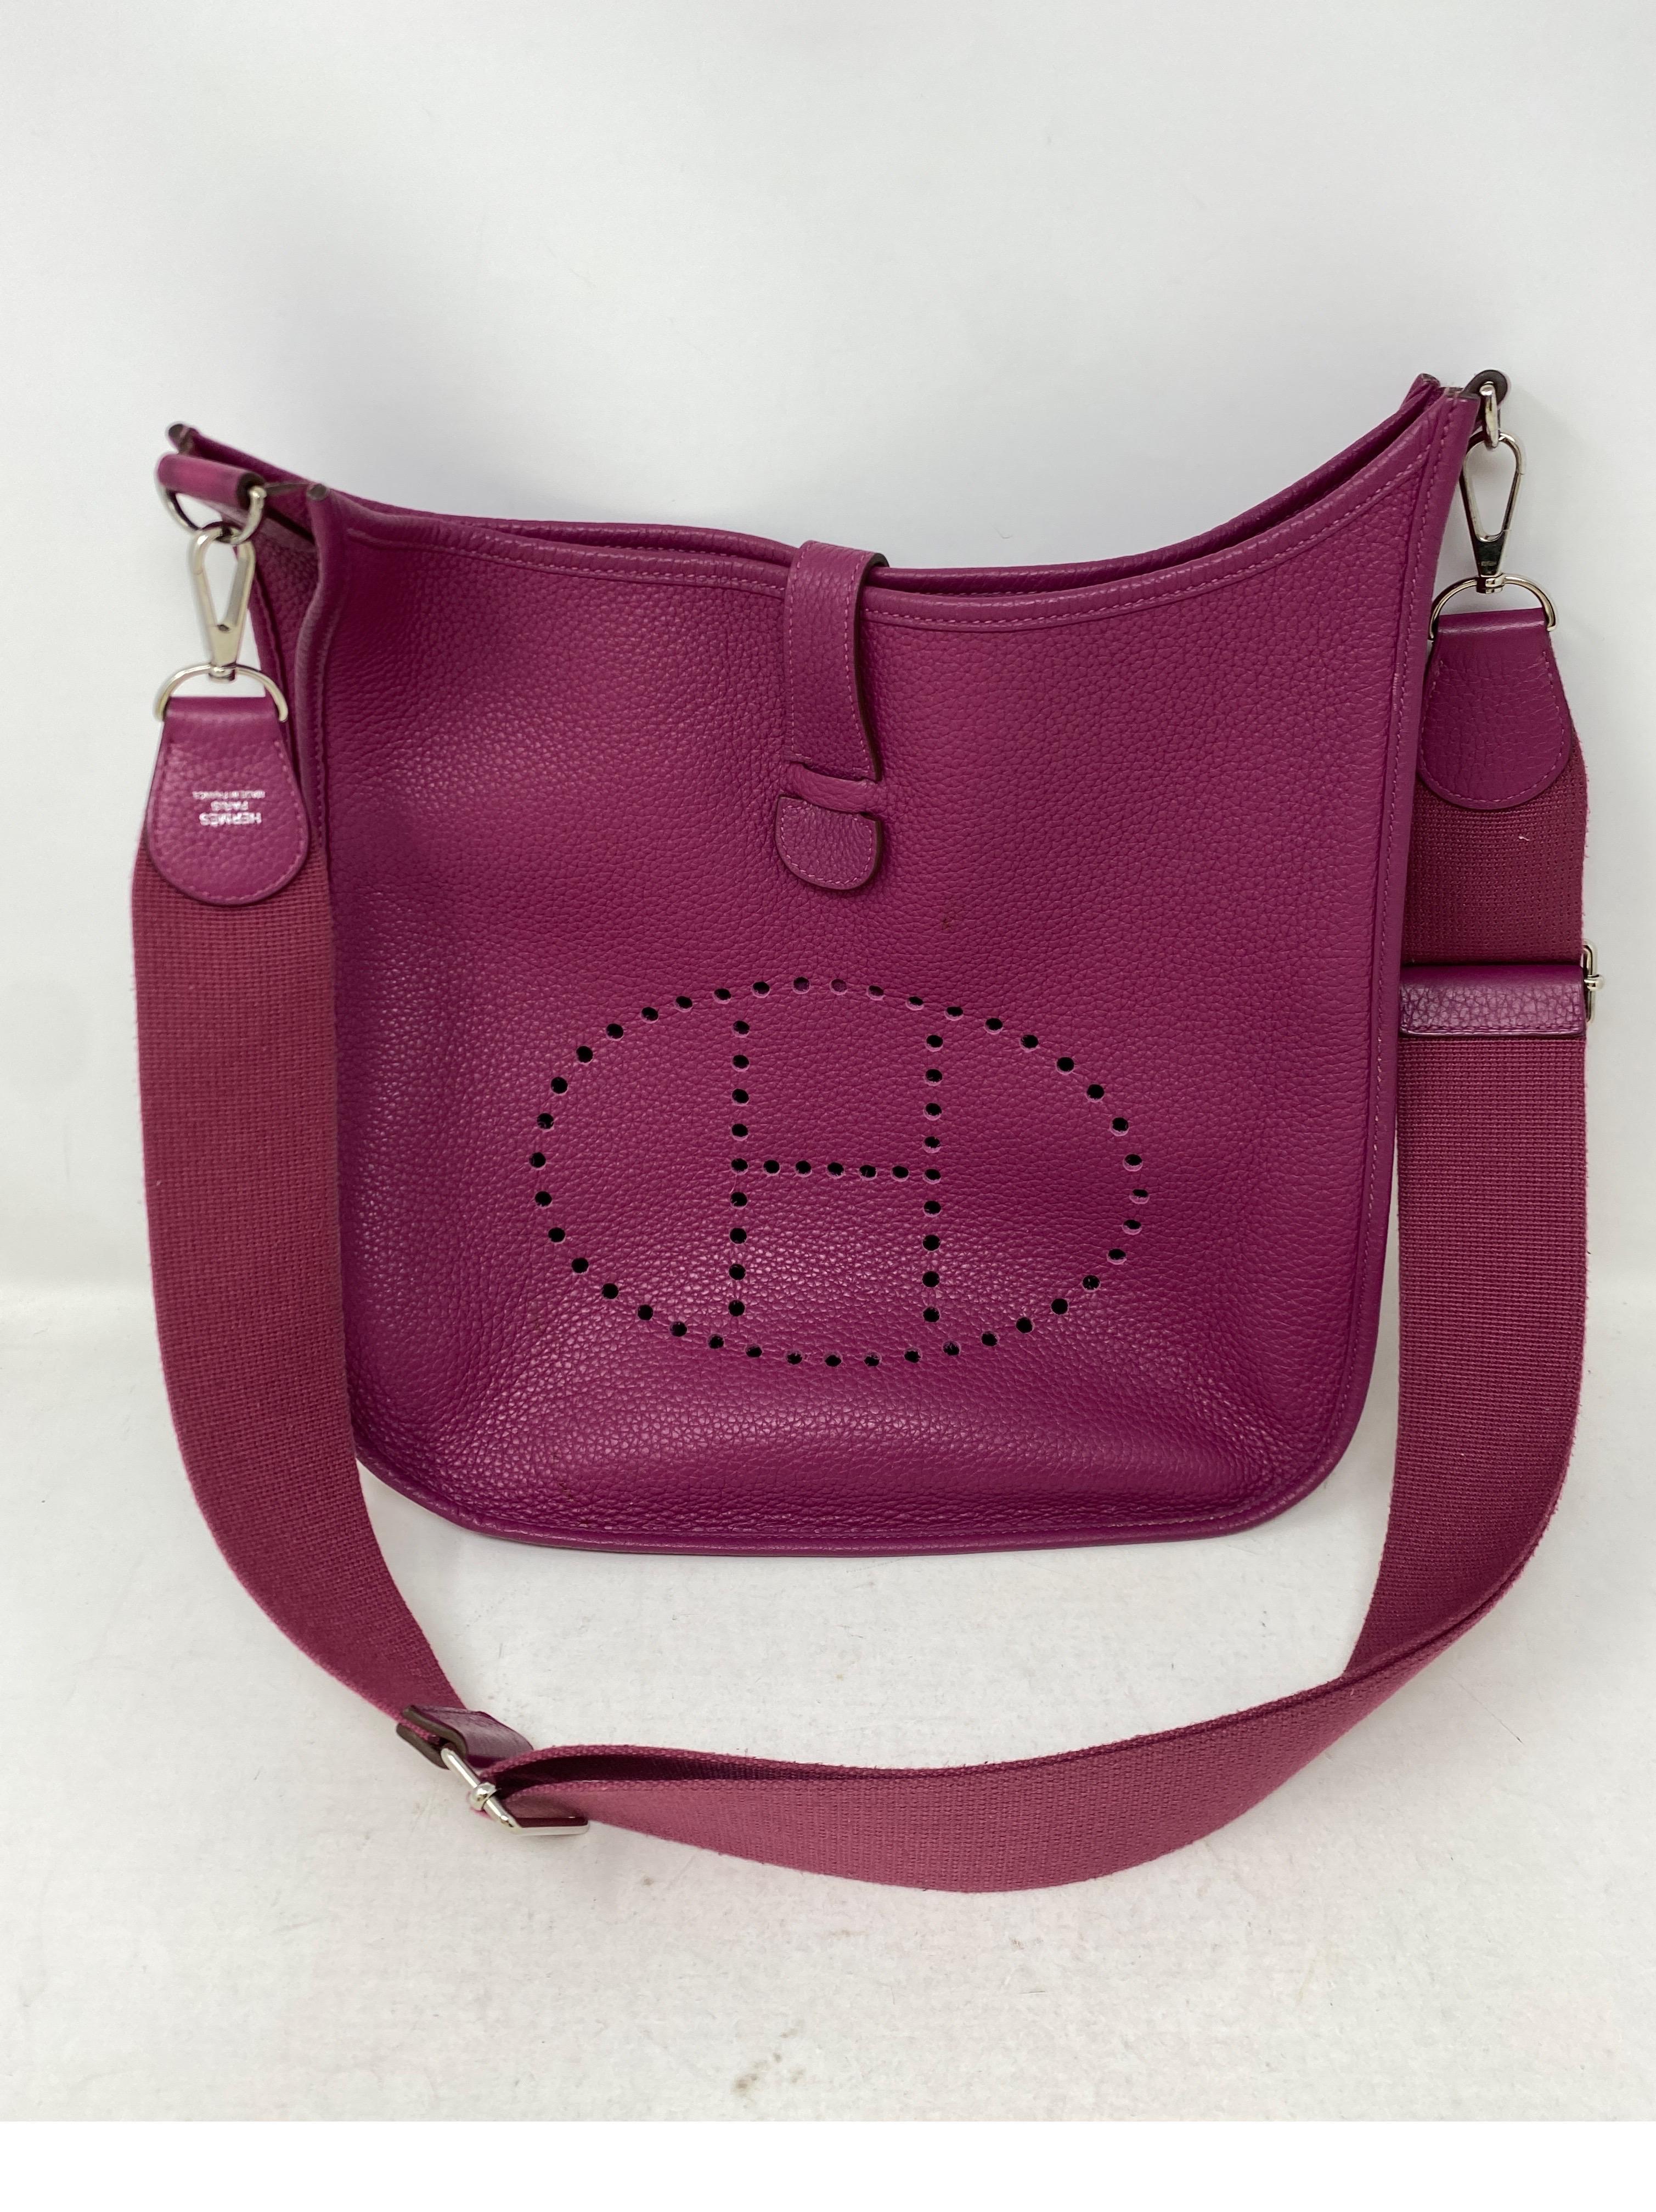 Hermes Fuschia Evelyne GM Bag. Excellent condition. Beautiful purple fuschia color. Palladium hardware. Newer Evelyne bag with adjustable straps. Interior clean. Guaranteed authentic. 